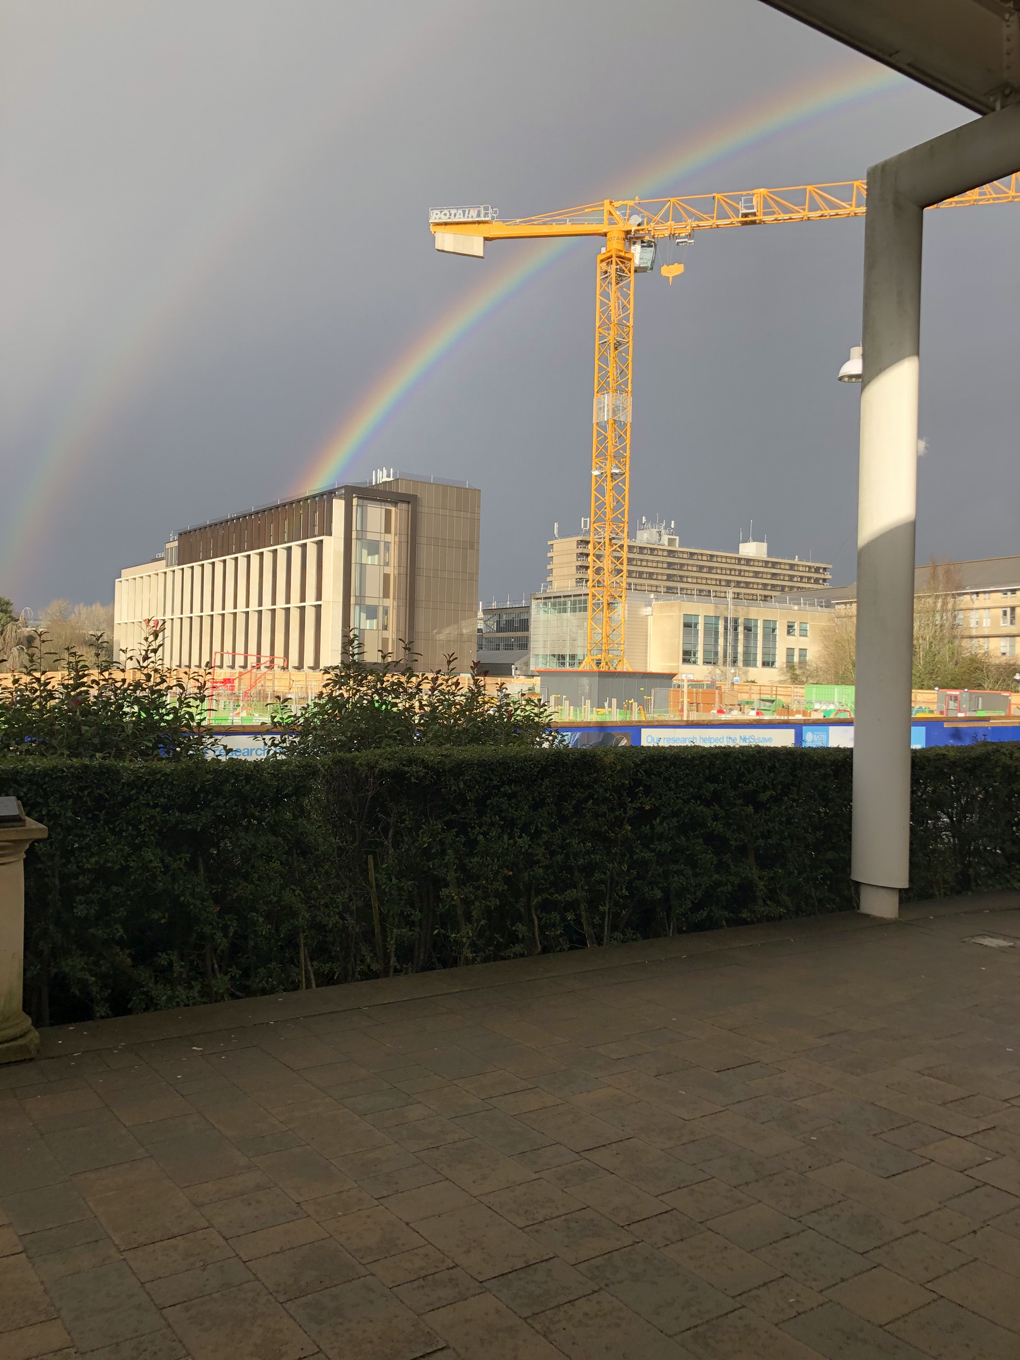 A double rainbow stretching over the University of Bath campus